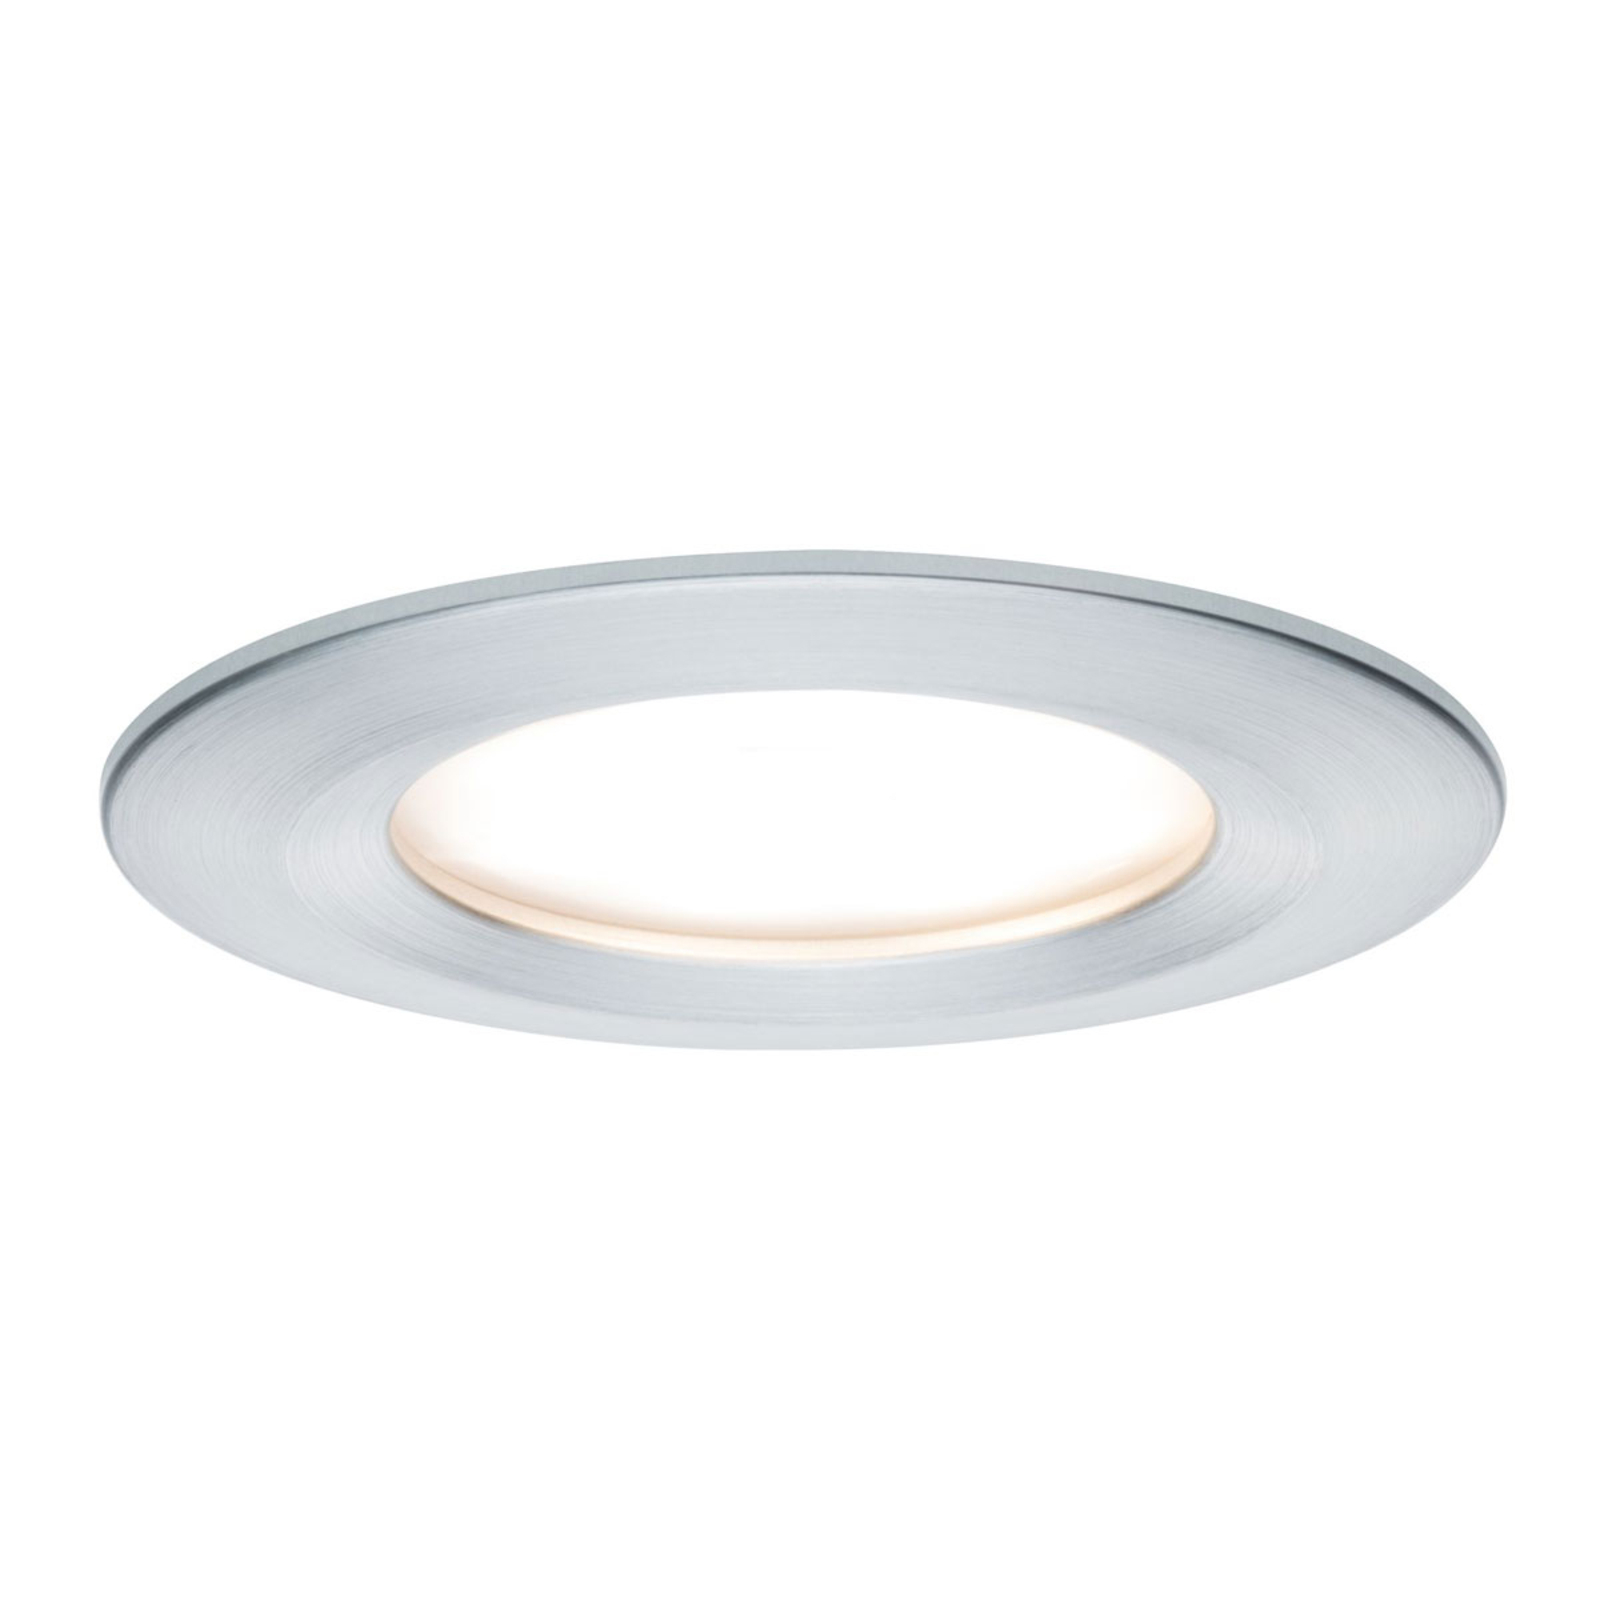 Paulmann σετ 3 προβολέων LED Slim Coin, dimmable, αλουμίνιο